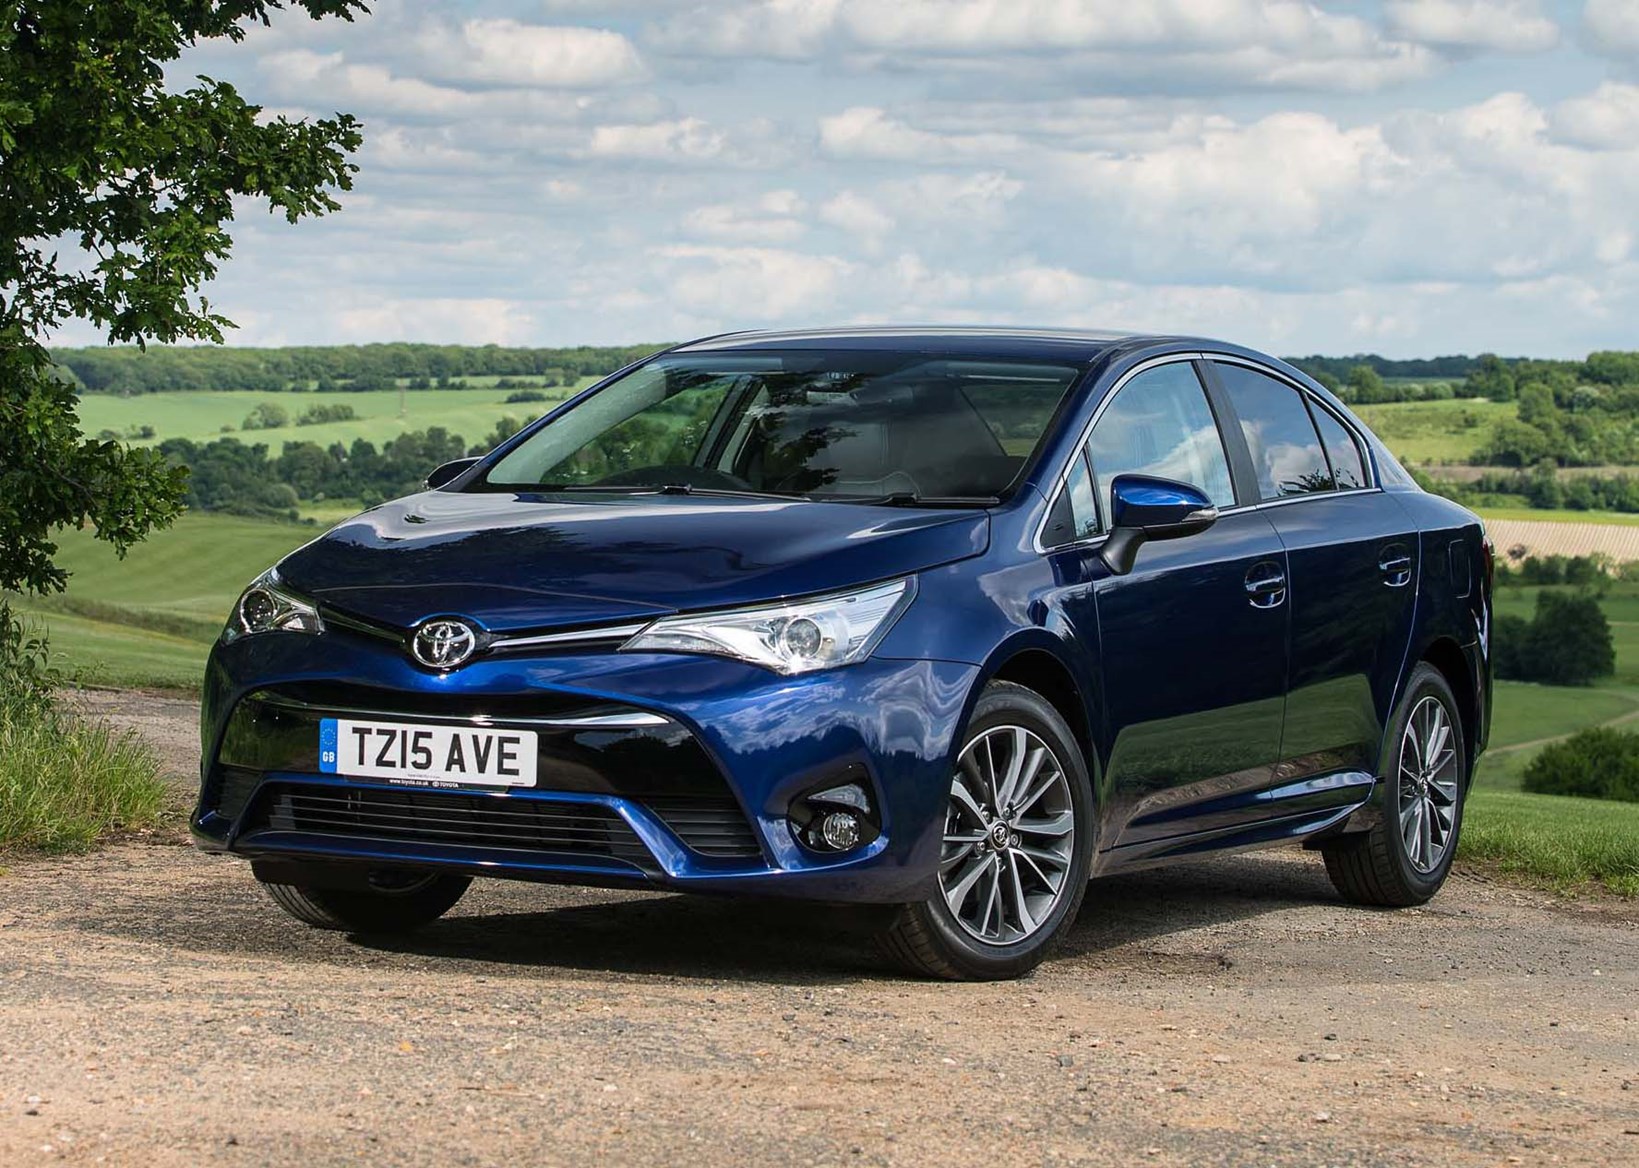 Toyota Avensis 2018 Owners Manual